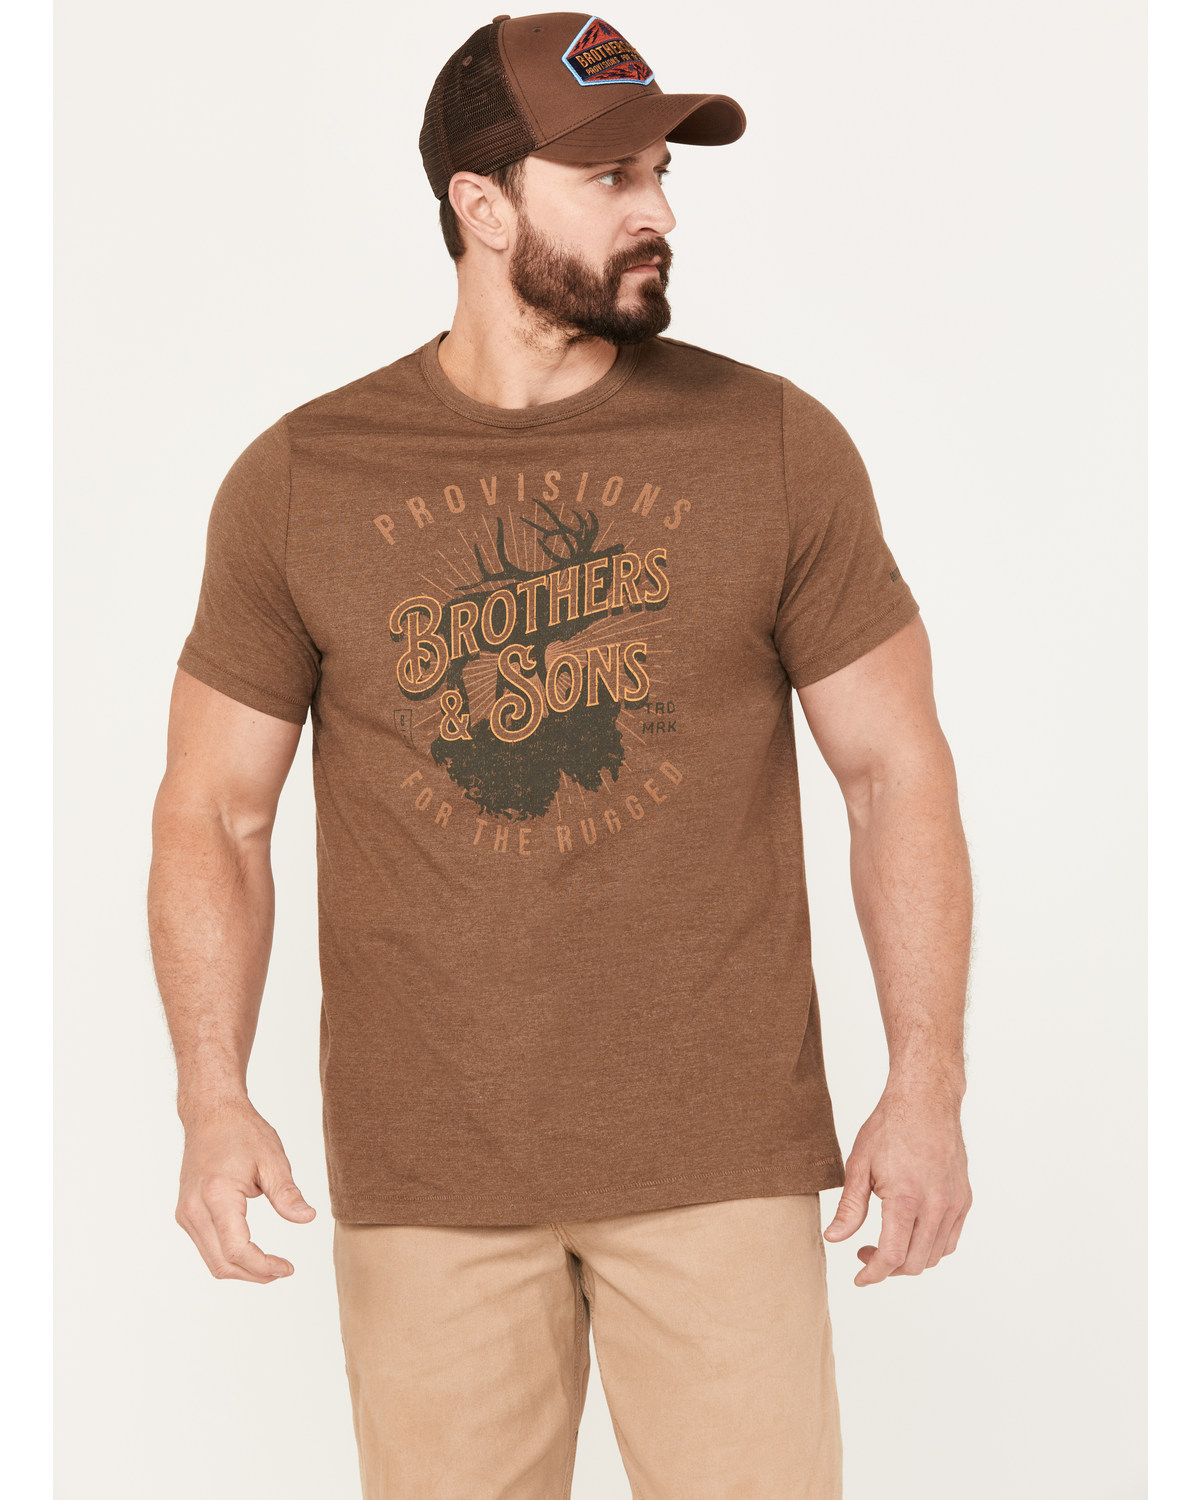 Brothers and Sons Men's Elk Label Short Sleeve Graphic T-Shirt